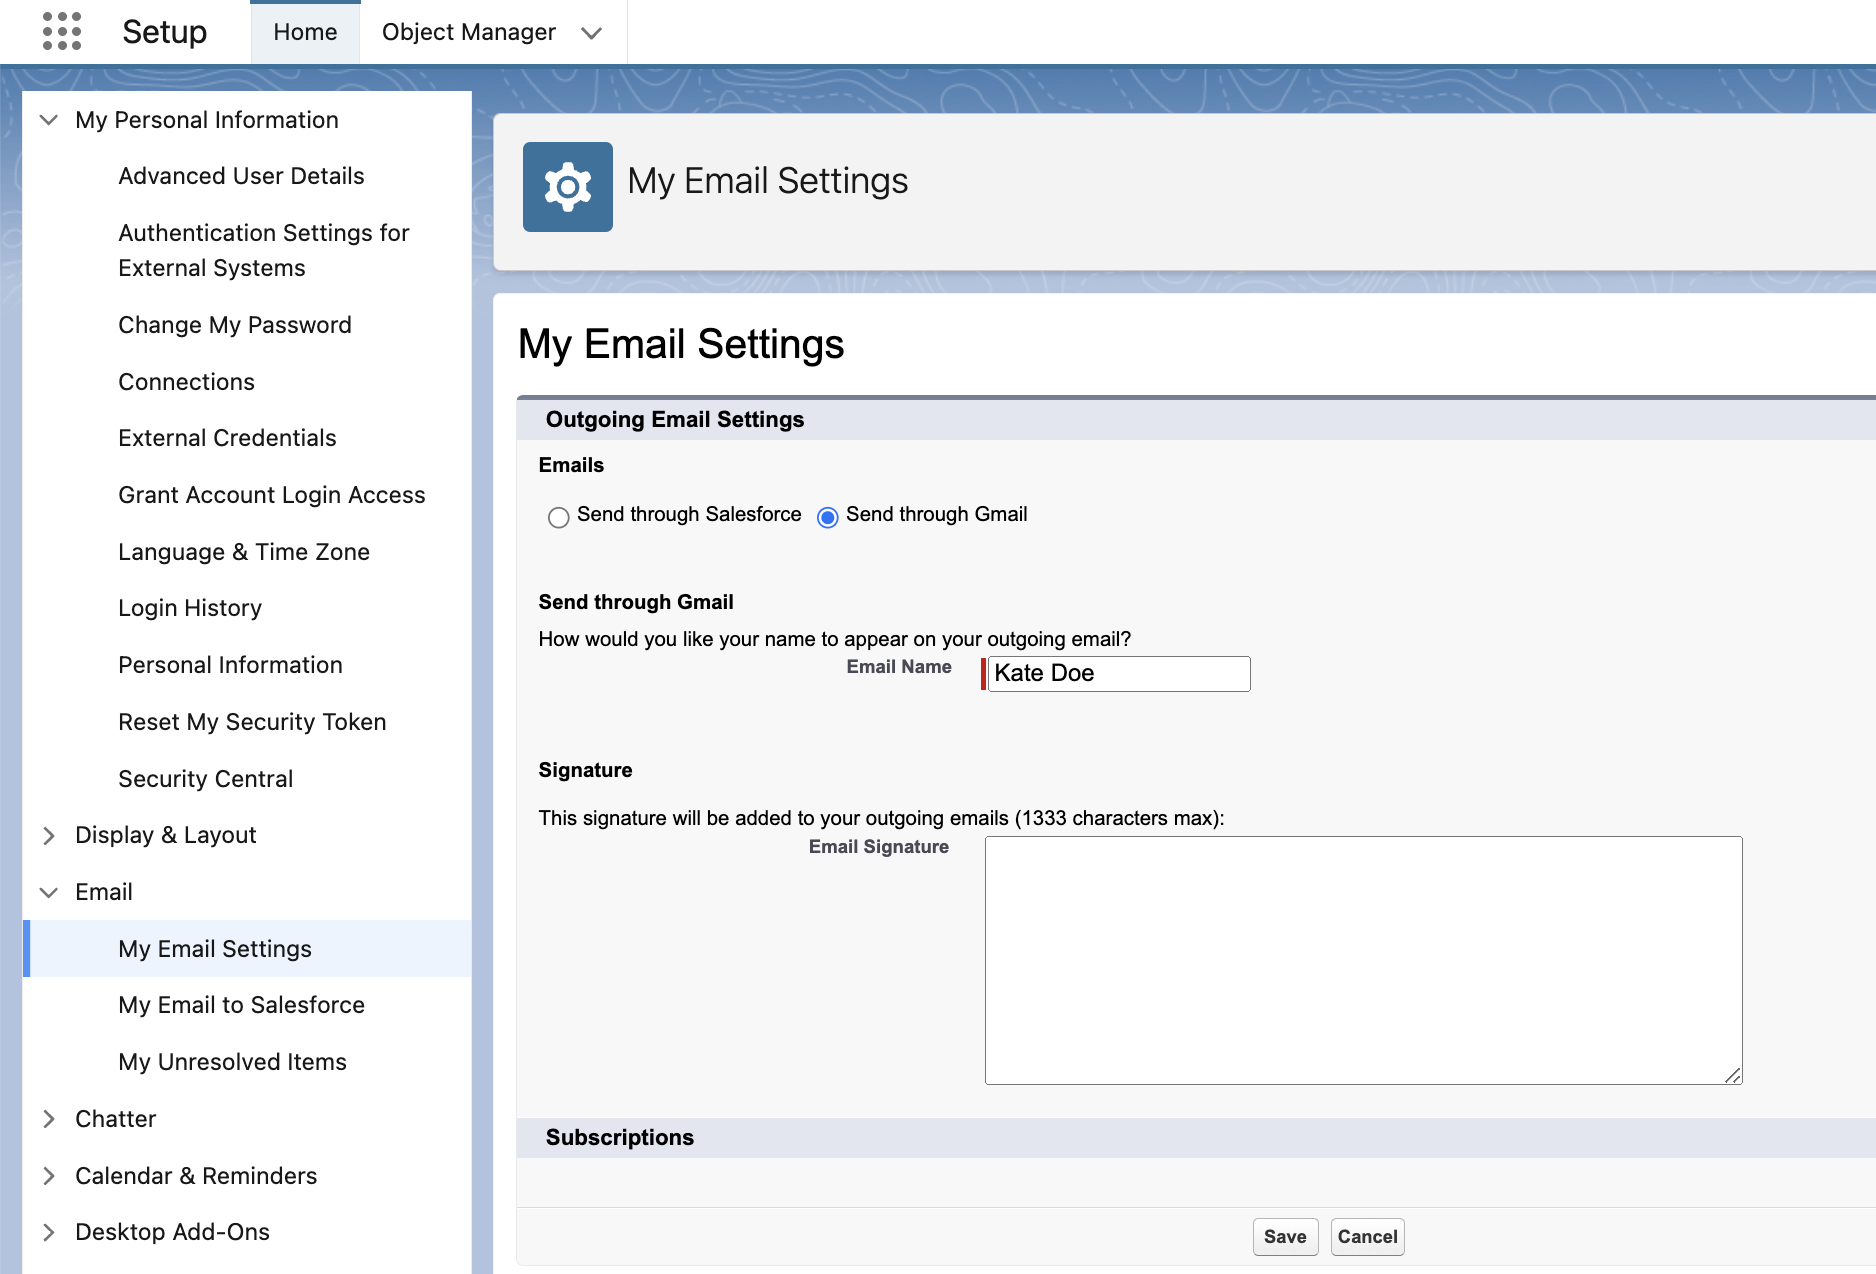 Configuring email settings in Salesforce Lightning Experience